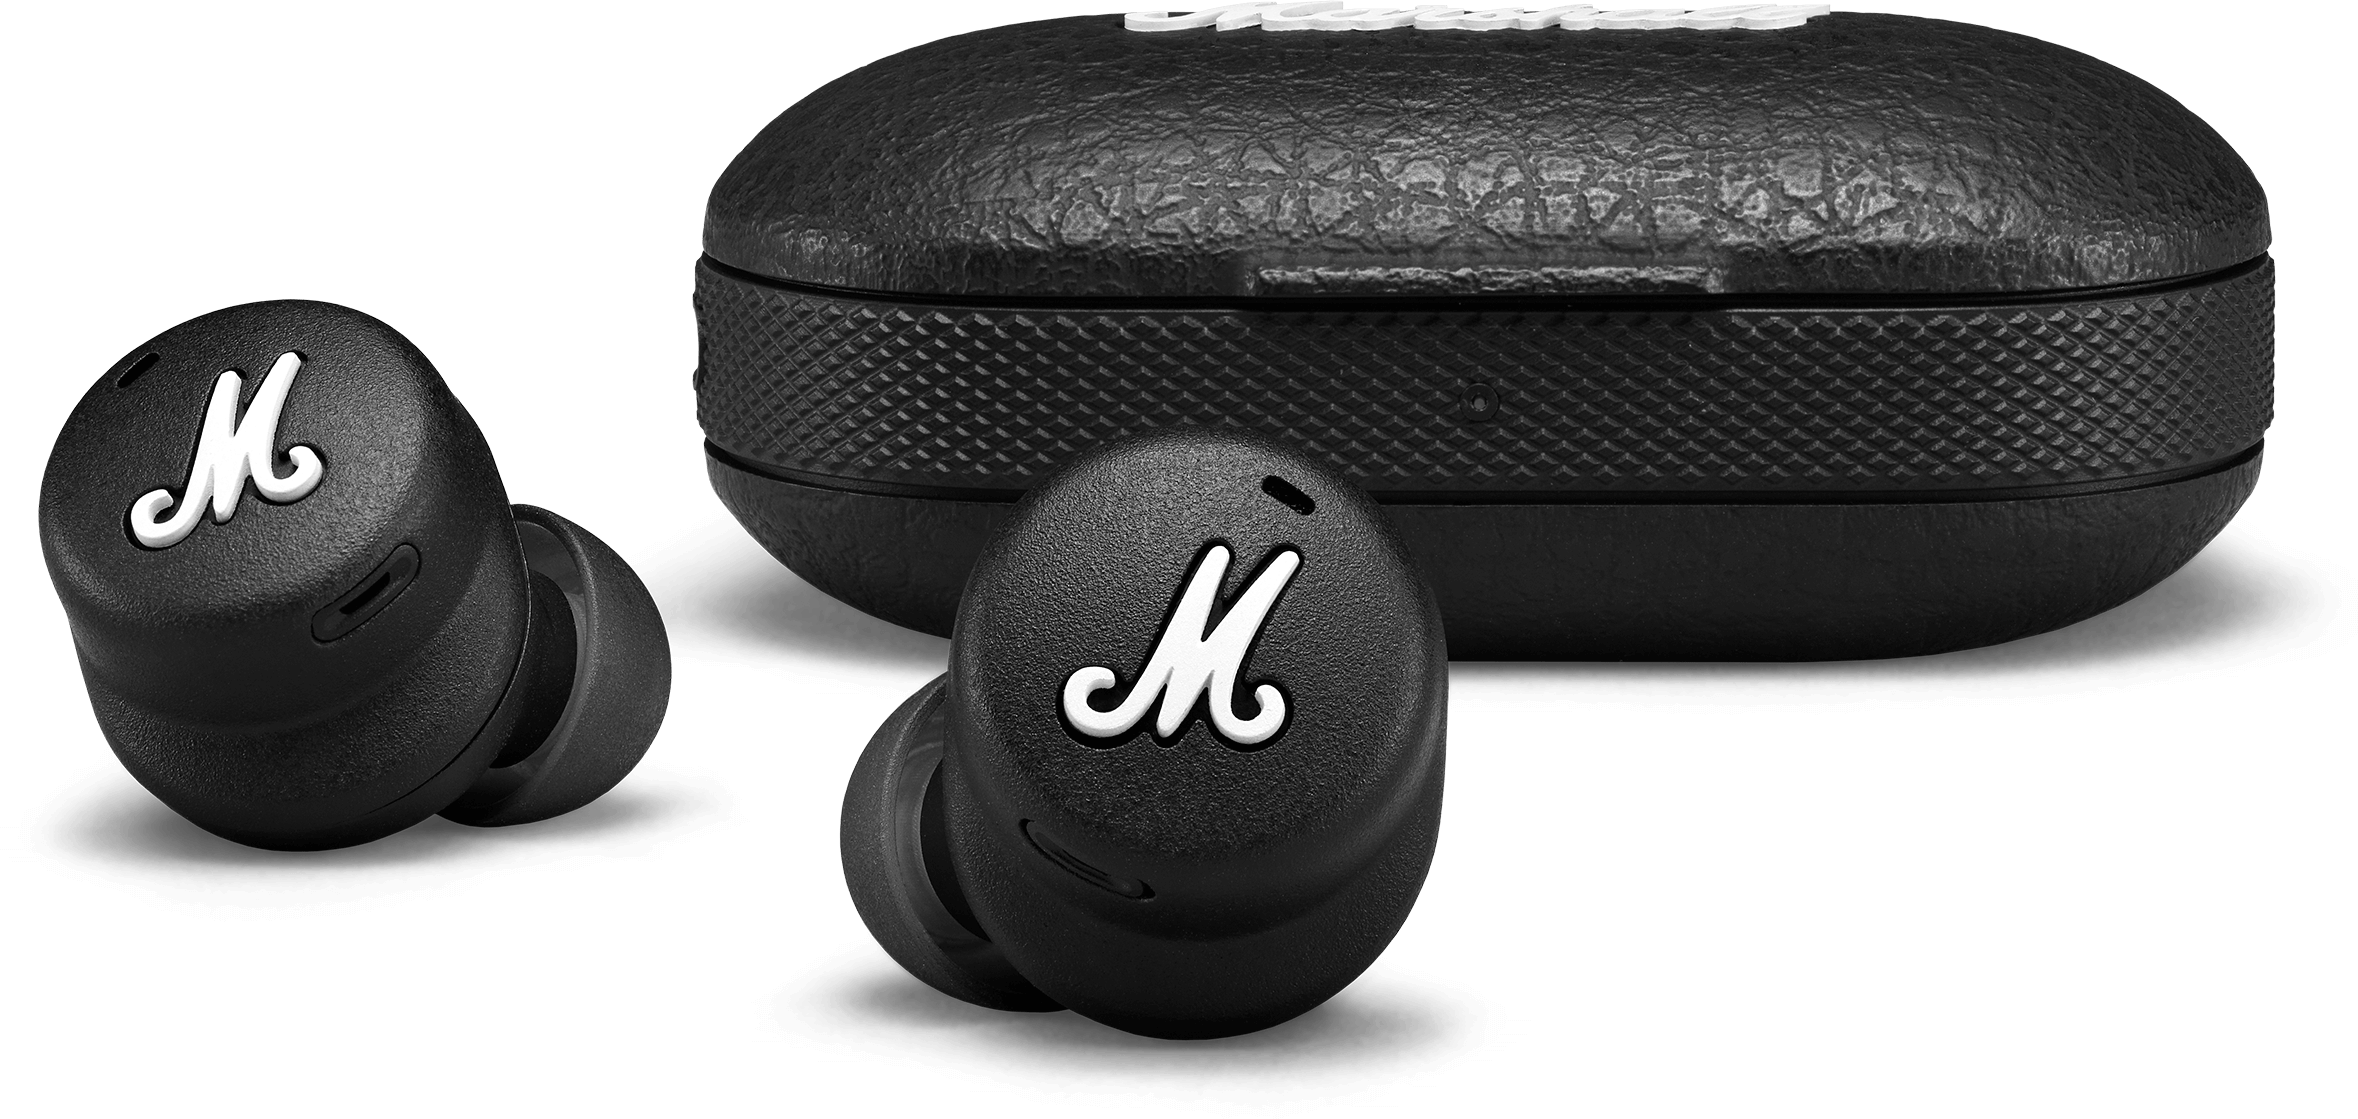 Marshall Mode II are the first true wireless earbuds from the iconic British amplifier manufacturer